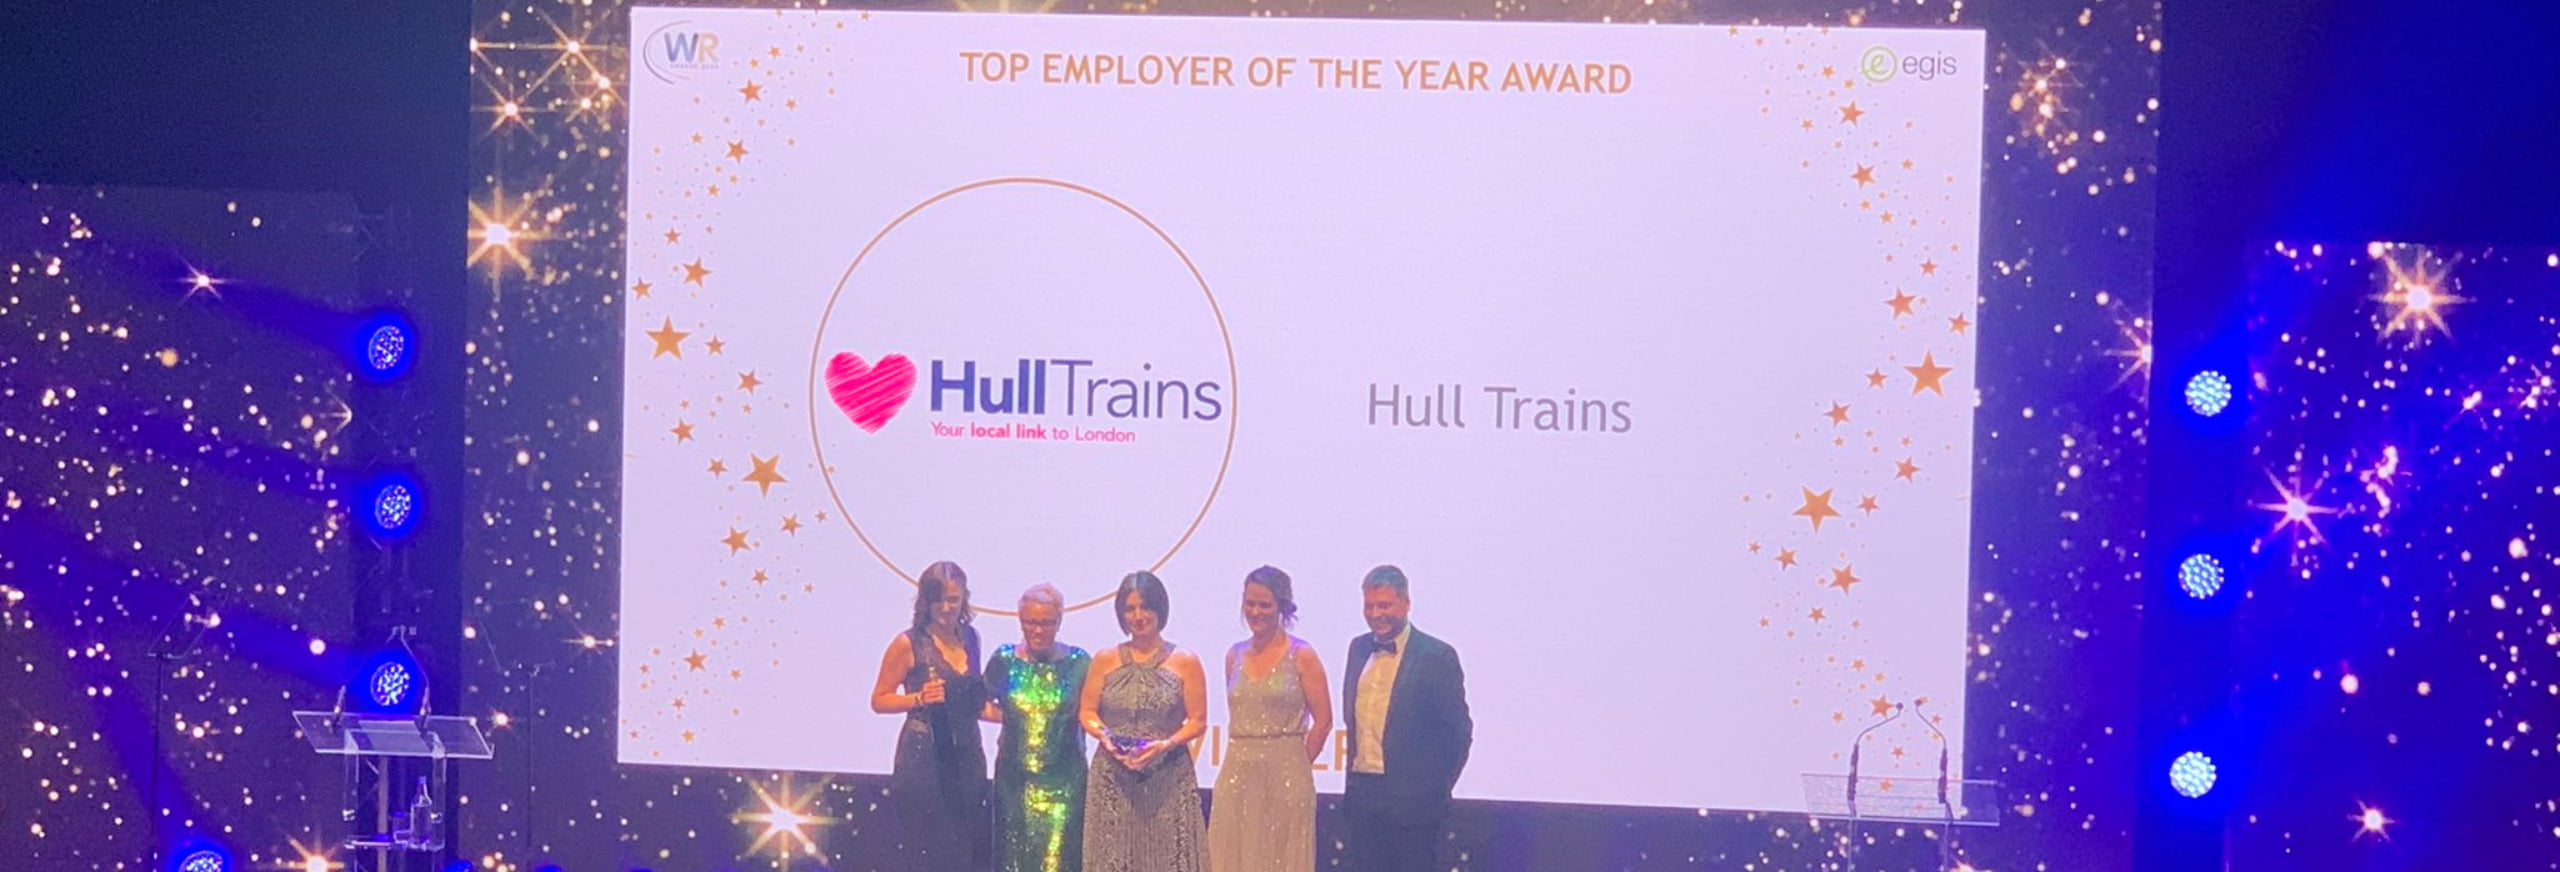 Hull Trains wins Top Employer of the Year at the Women in Rail Awards